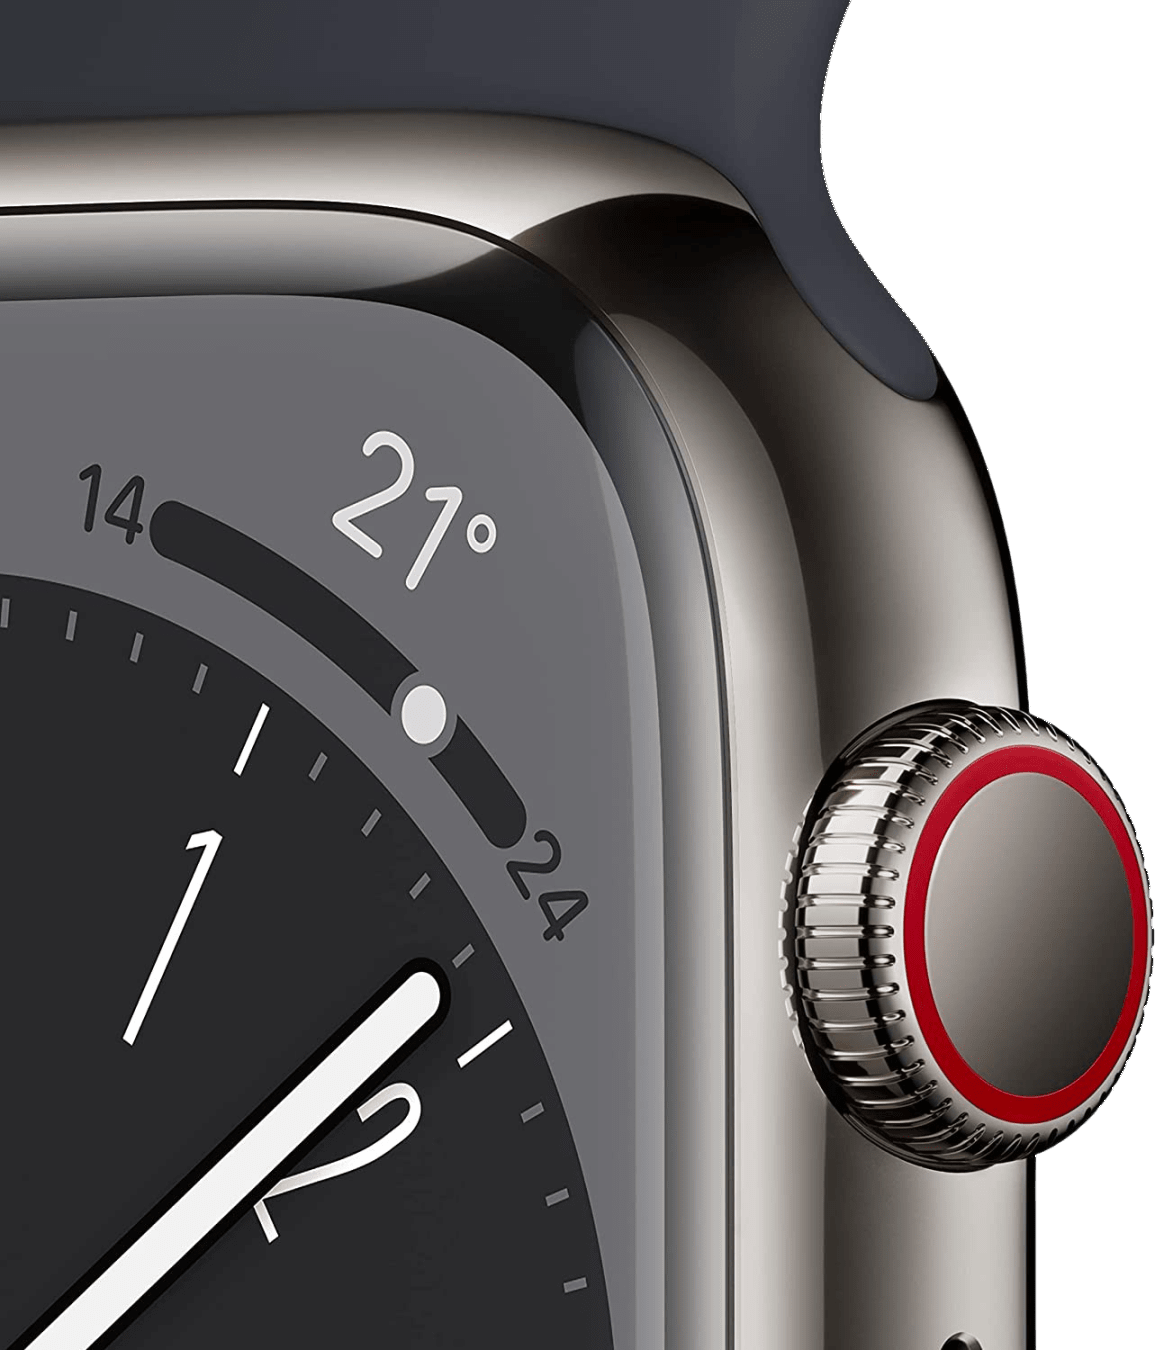 Apple Watch S8 STS 45mm Graphit (Sportband Midnight) LTE Blister